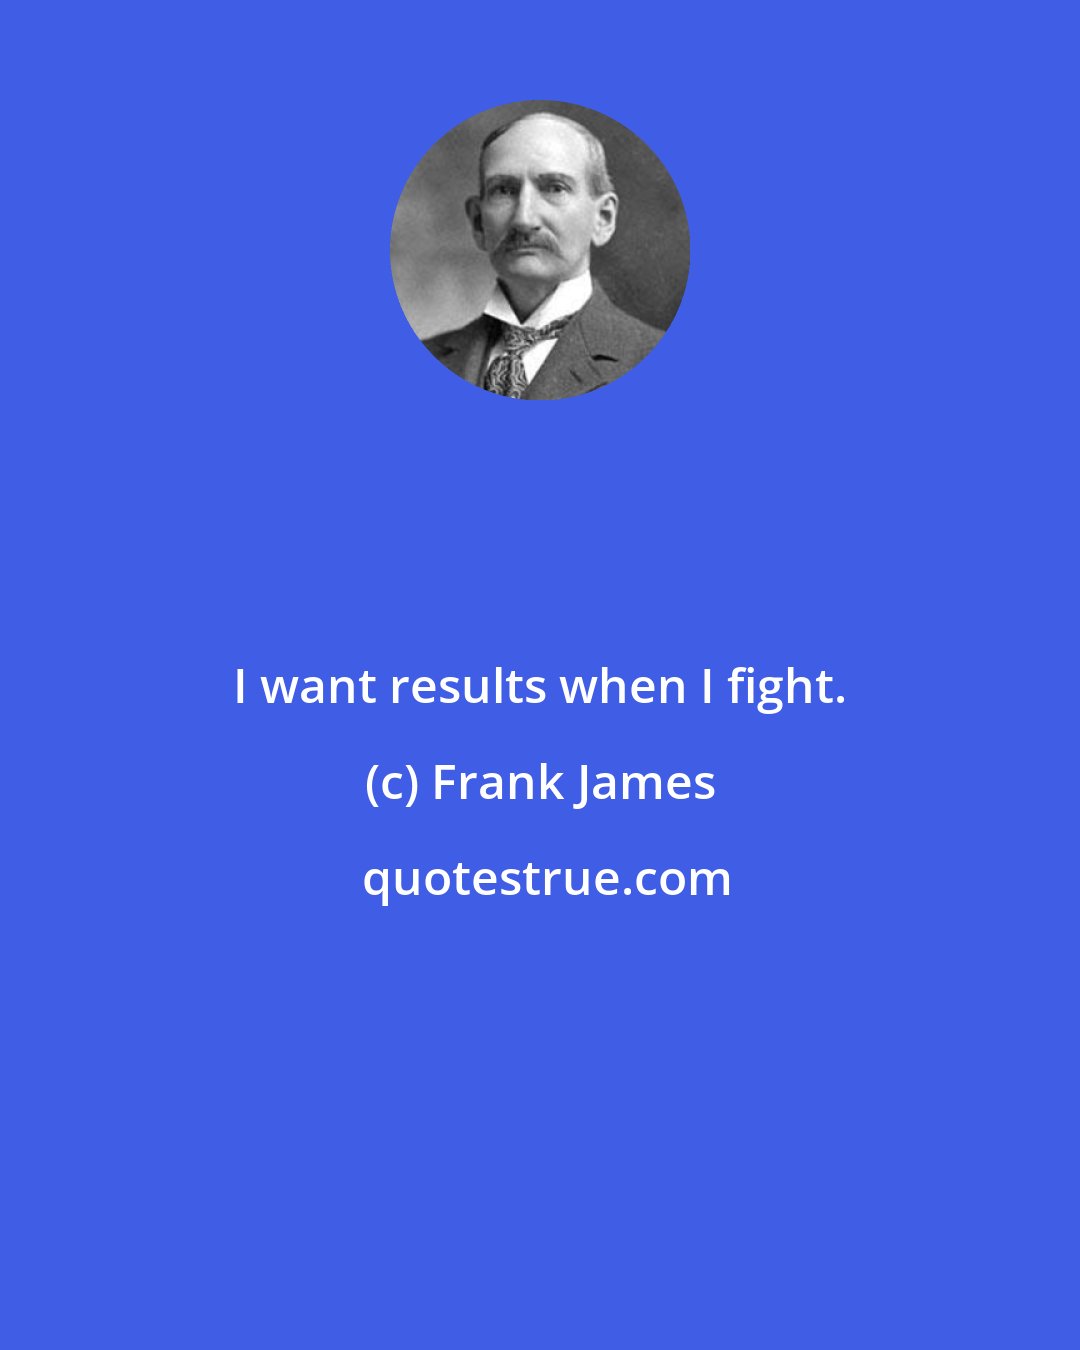 Frank James: I want results when I fight.